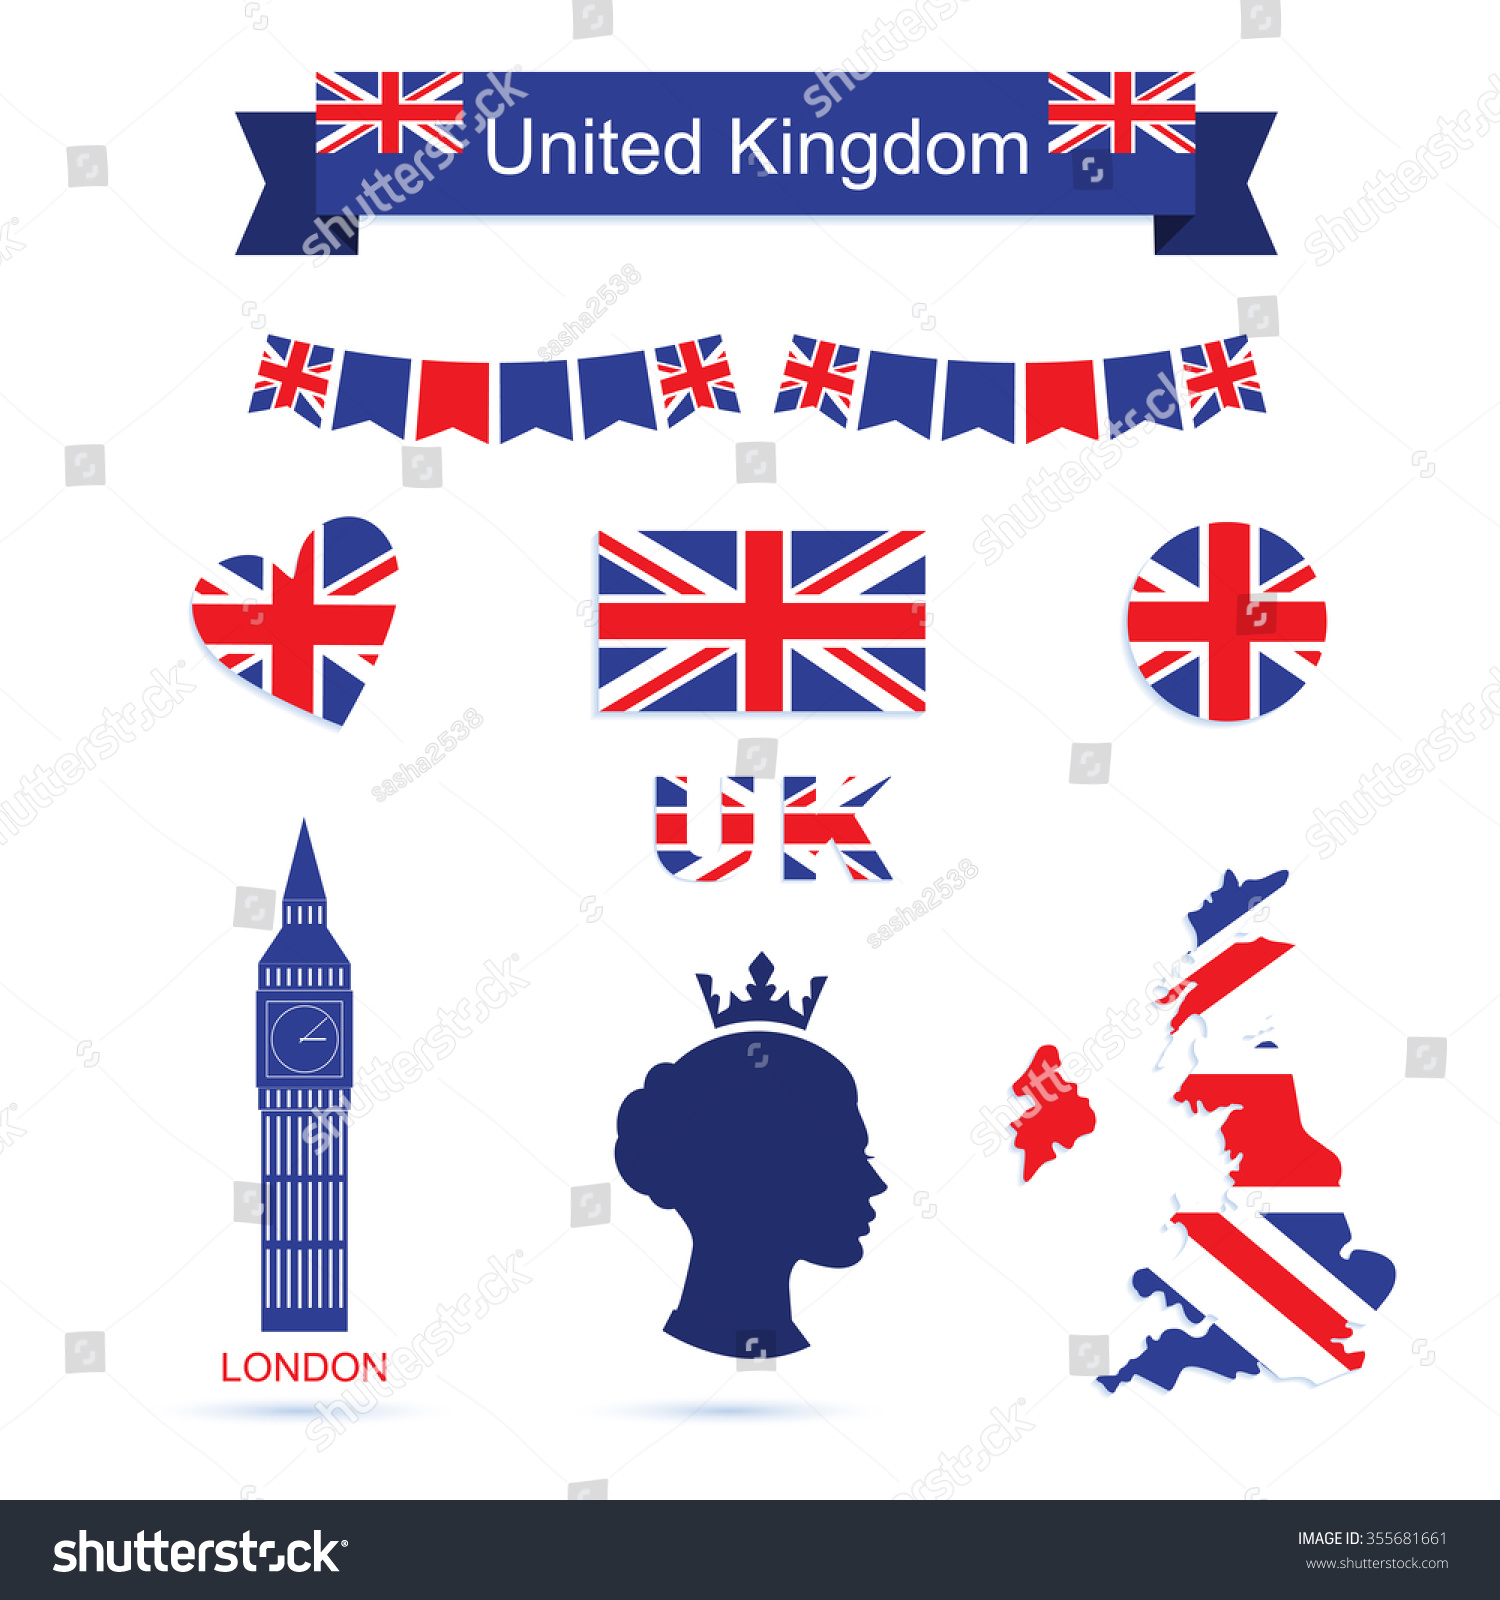 SVG of United Kingdom symbols. UK flag and map icons set. Big ben icon. Queen icon svg